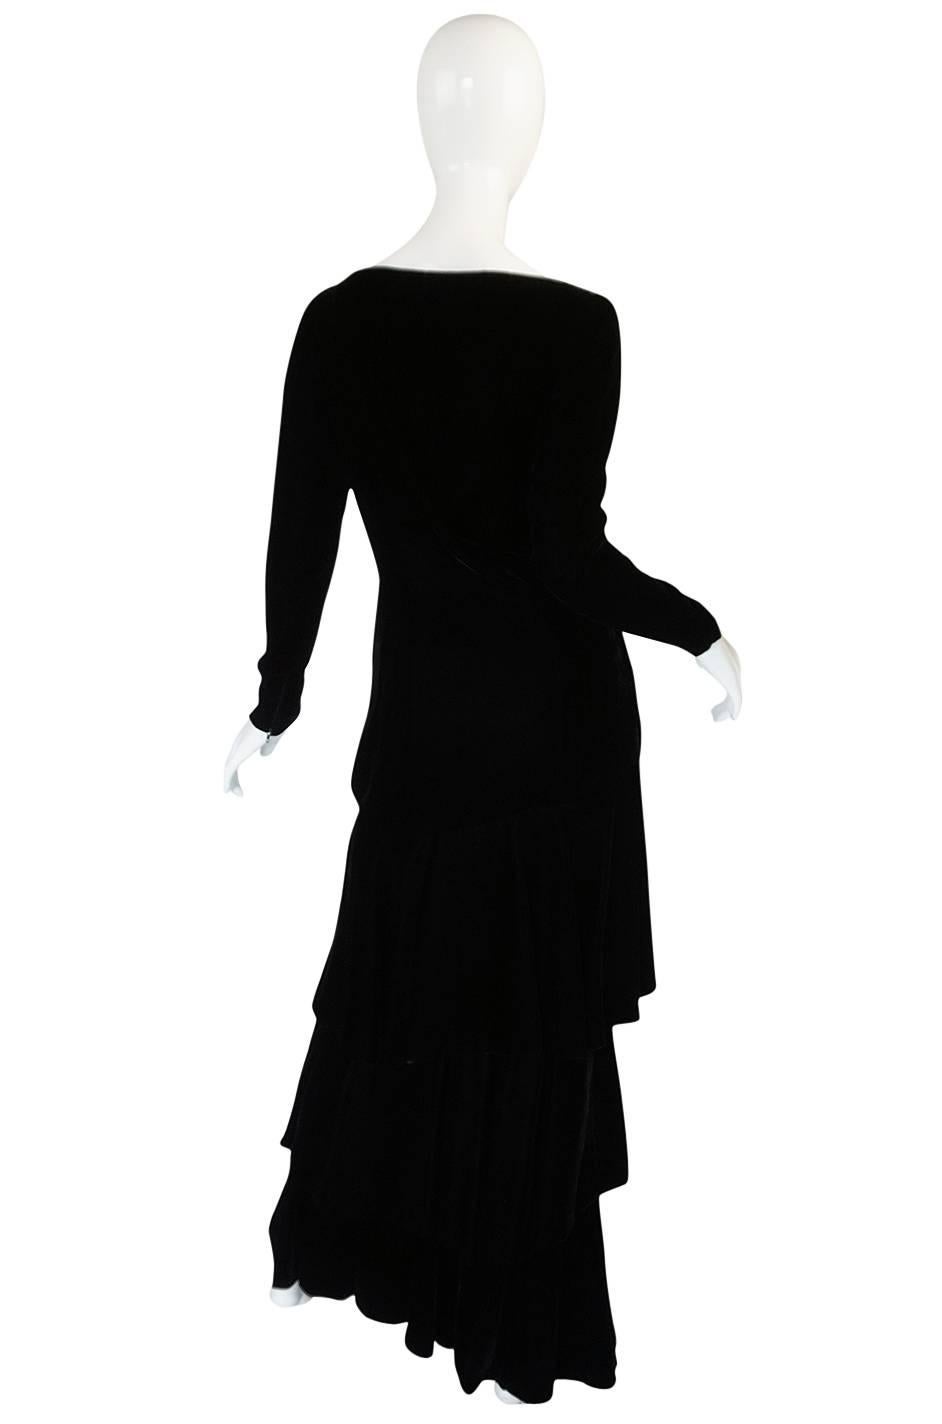 

A luxurious, rich black velvet maxi dress has a stunning long and slim cut accented by a wonderful tiered skirt and side plunging neckline. This gown by Lanvin is stunning in its simplicity and the richness of the velvet adds to that. I am so